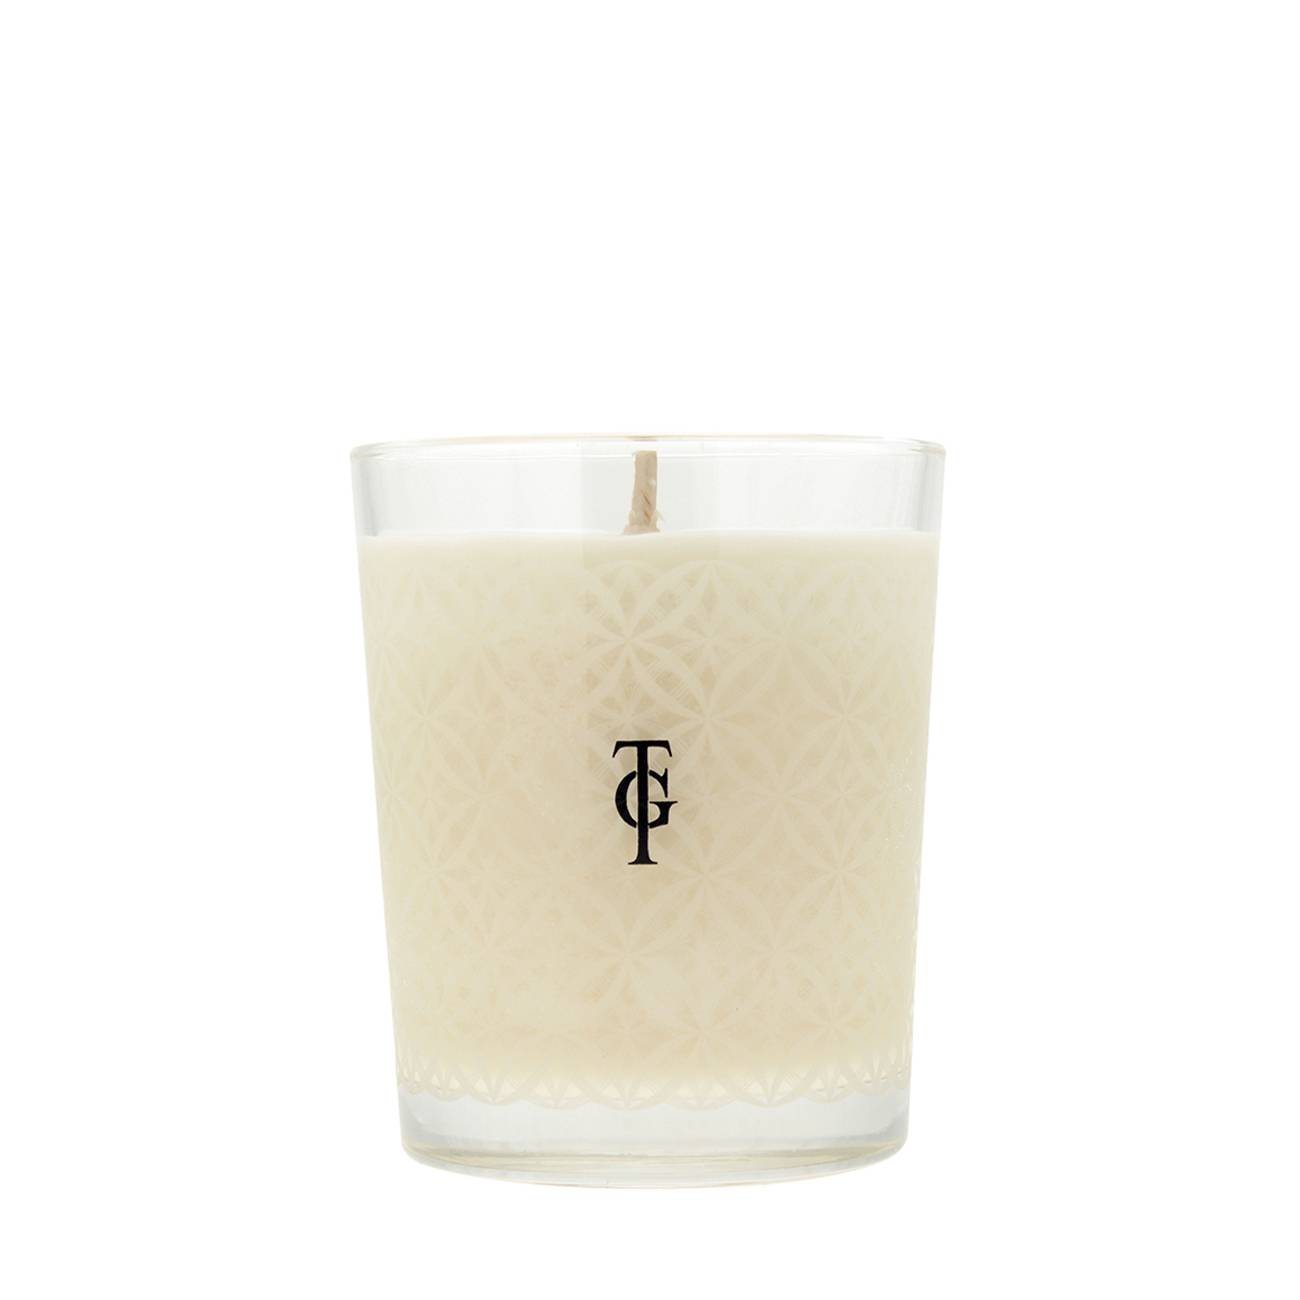 Village Classic Candle – Chesil Beach 190 gr 190